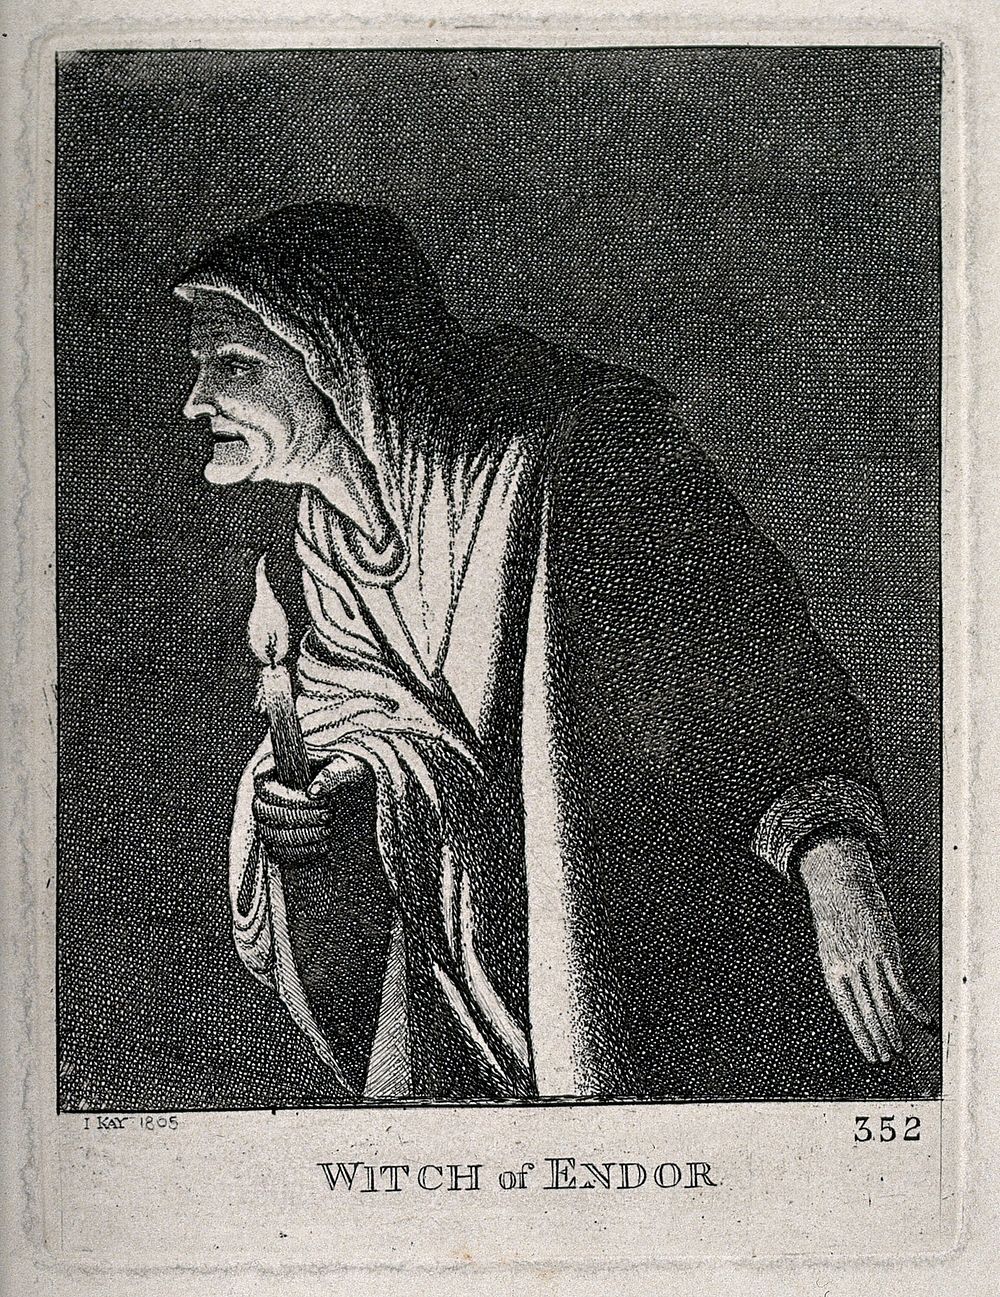 The witch of Endor with a candle. Engraving by J. Kay, 1805, after A. Elsheimer.